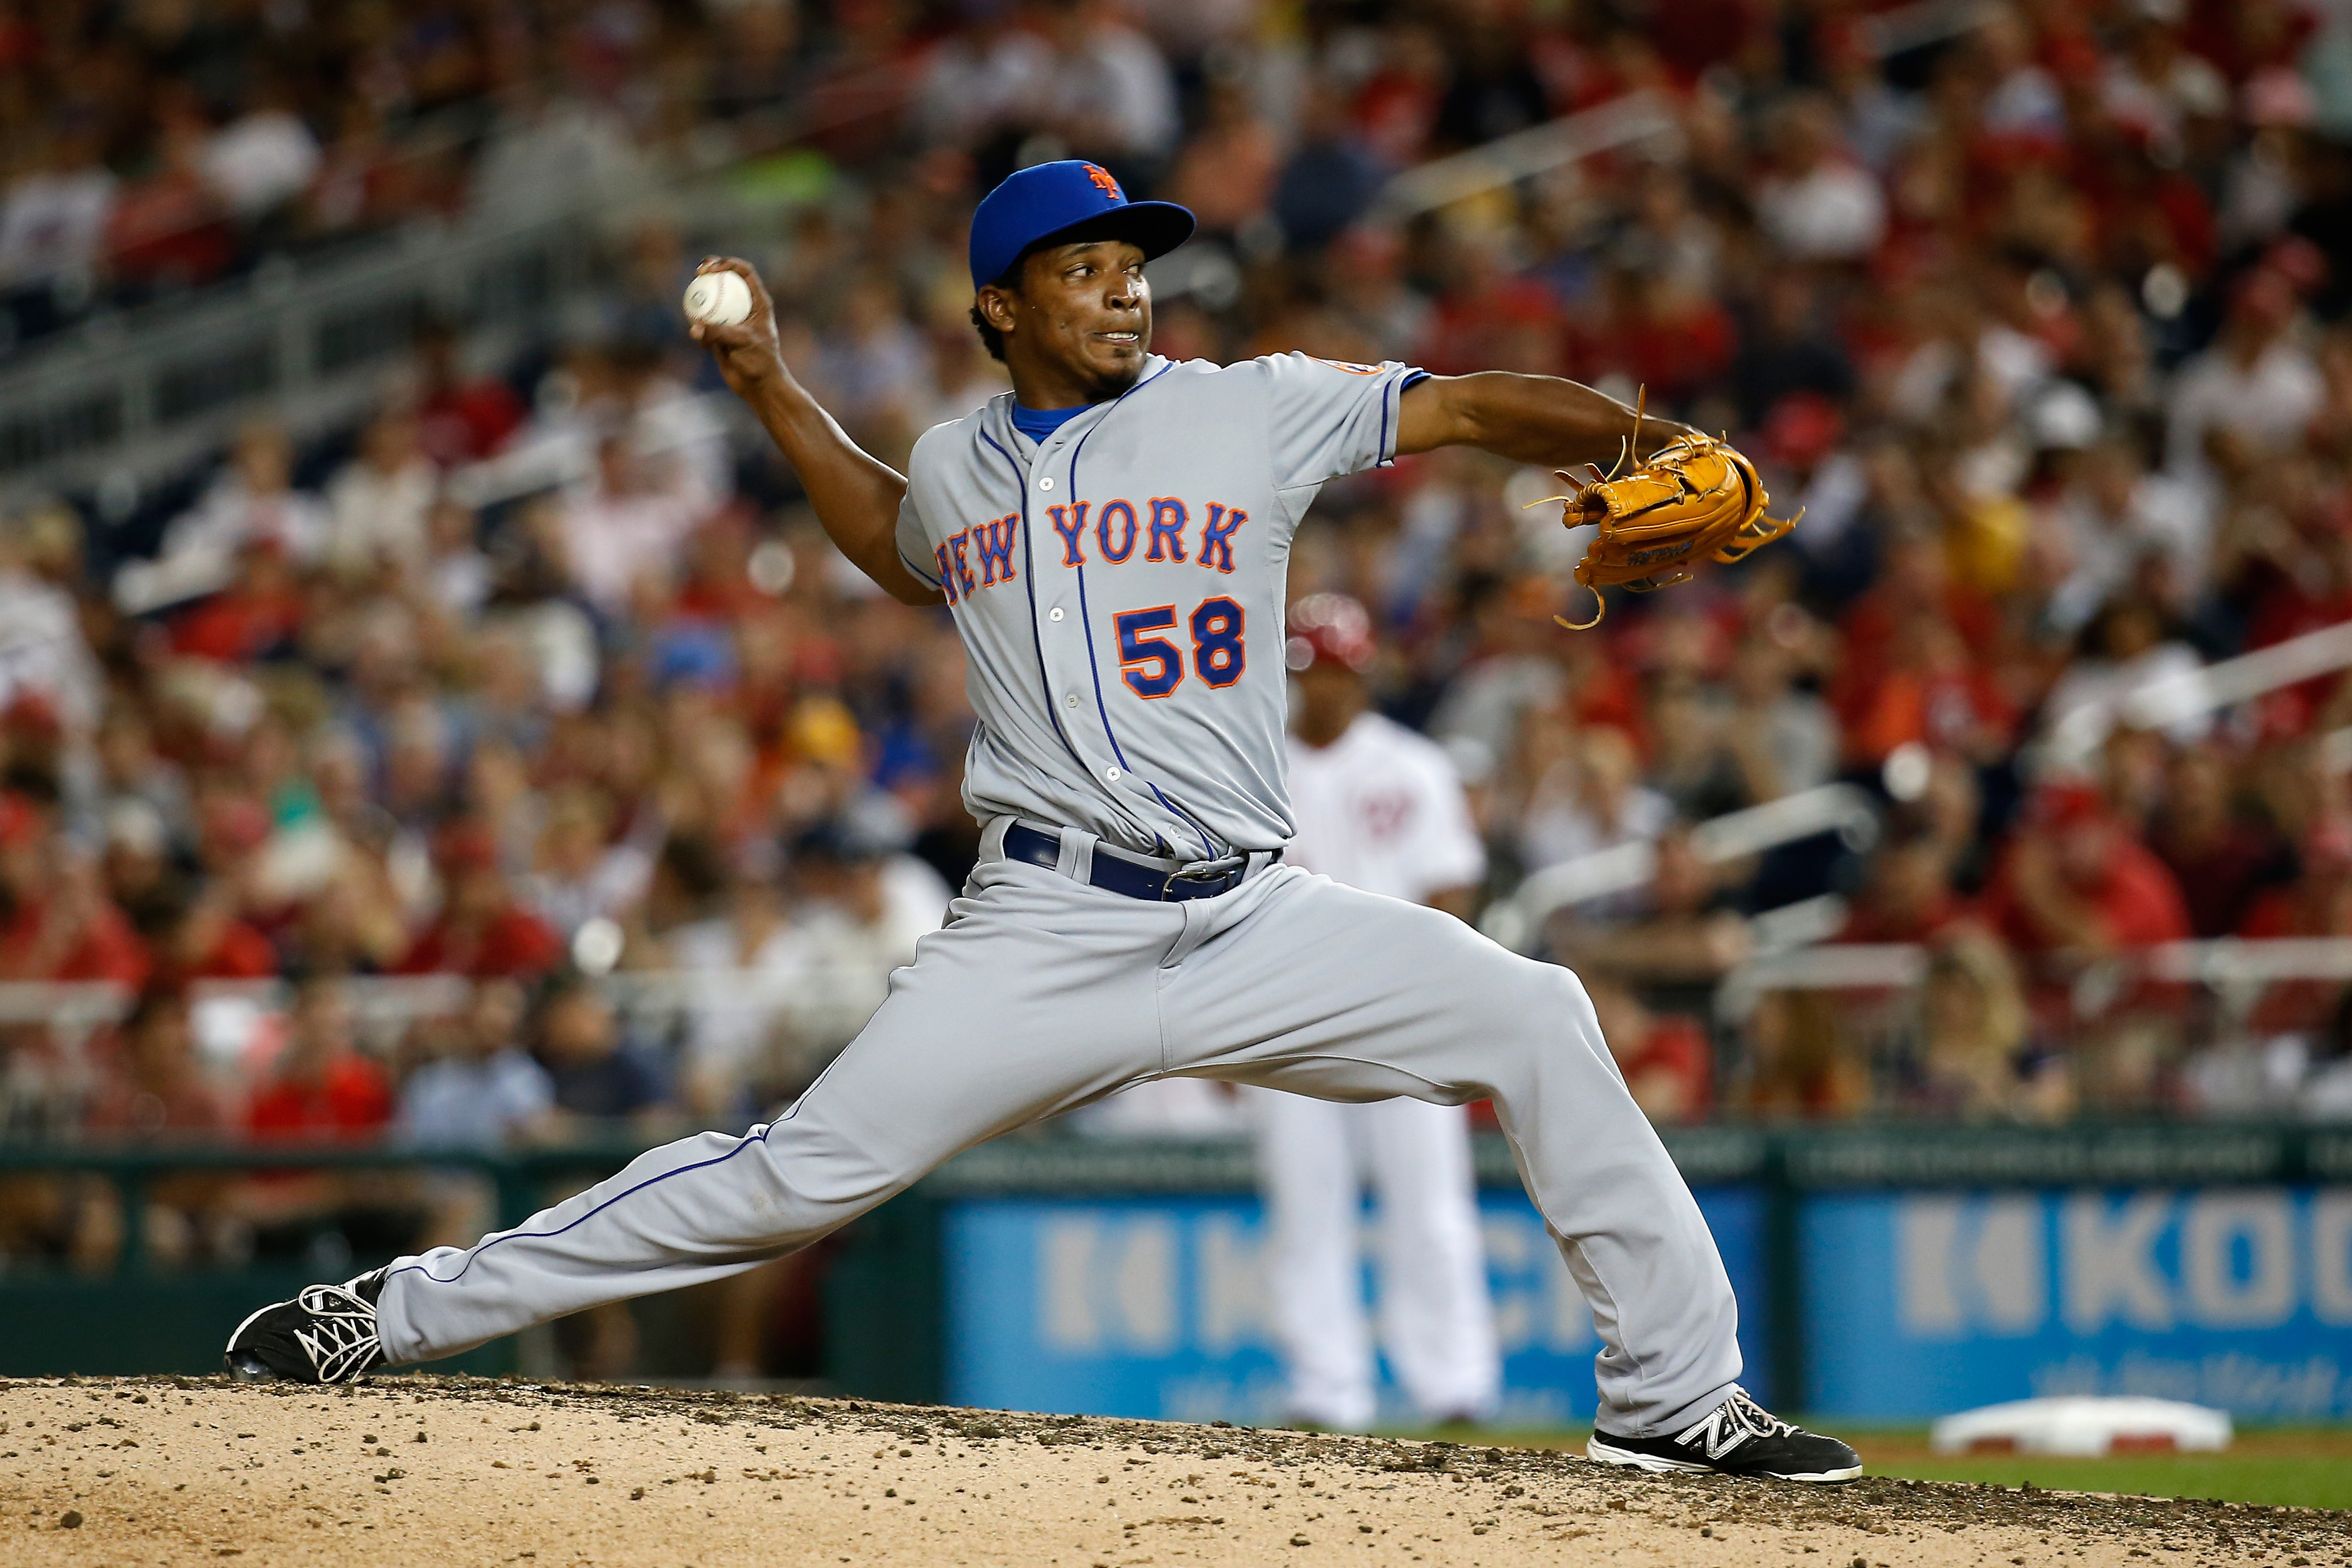 Jenrry Mejia at Nationals Park on July 21, 2015 in Washington, DC. (Rob Carr—Getty Images)